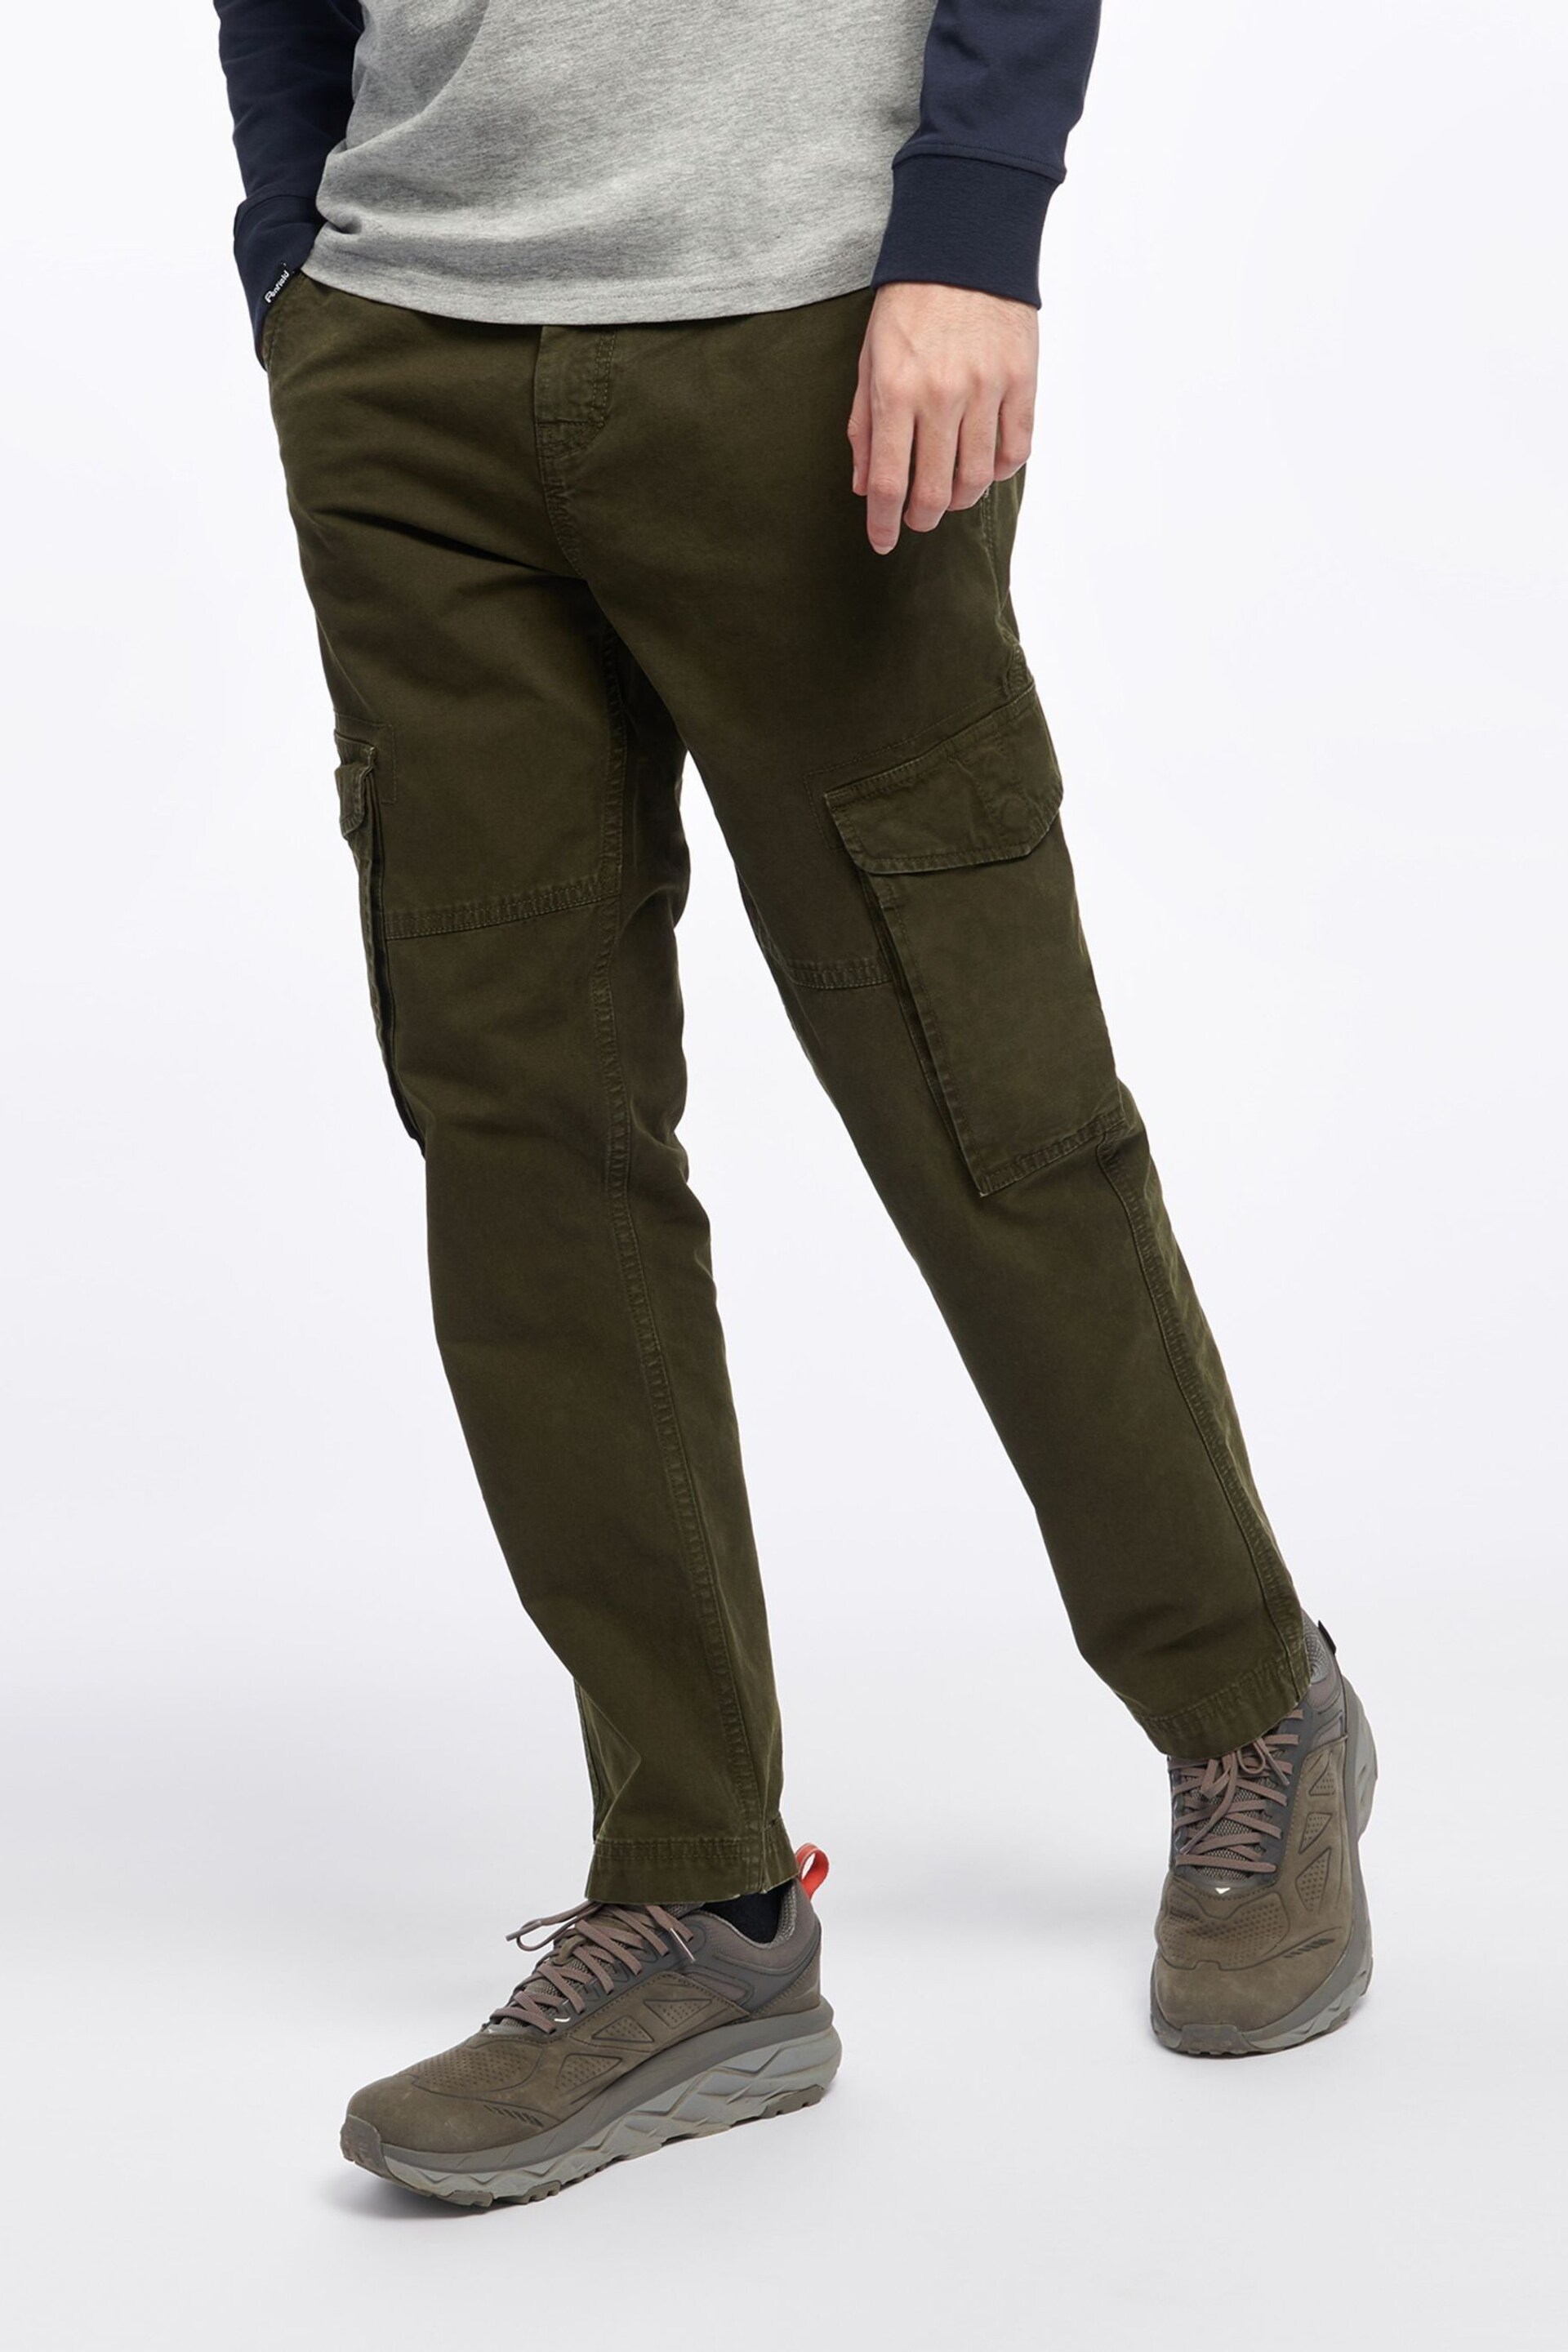 Penfield Green Hudson Script Elasticated Waist Trousers - Image 1 of 7